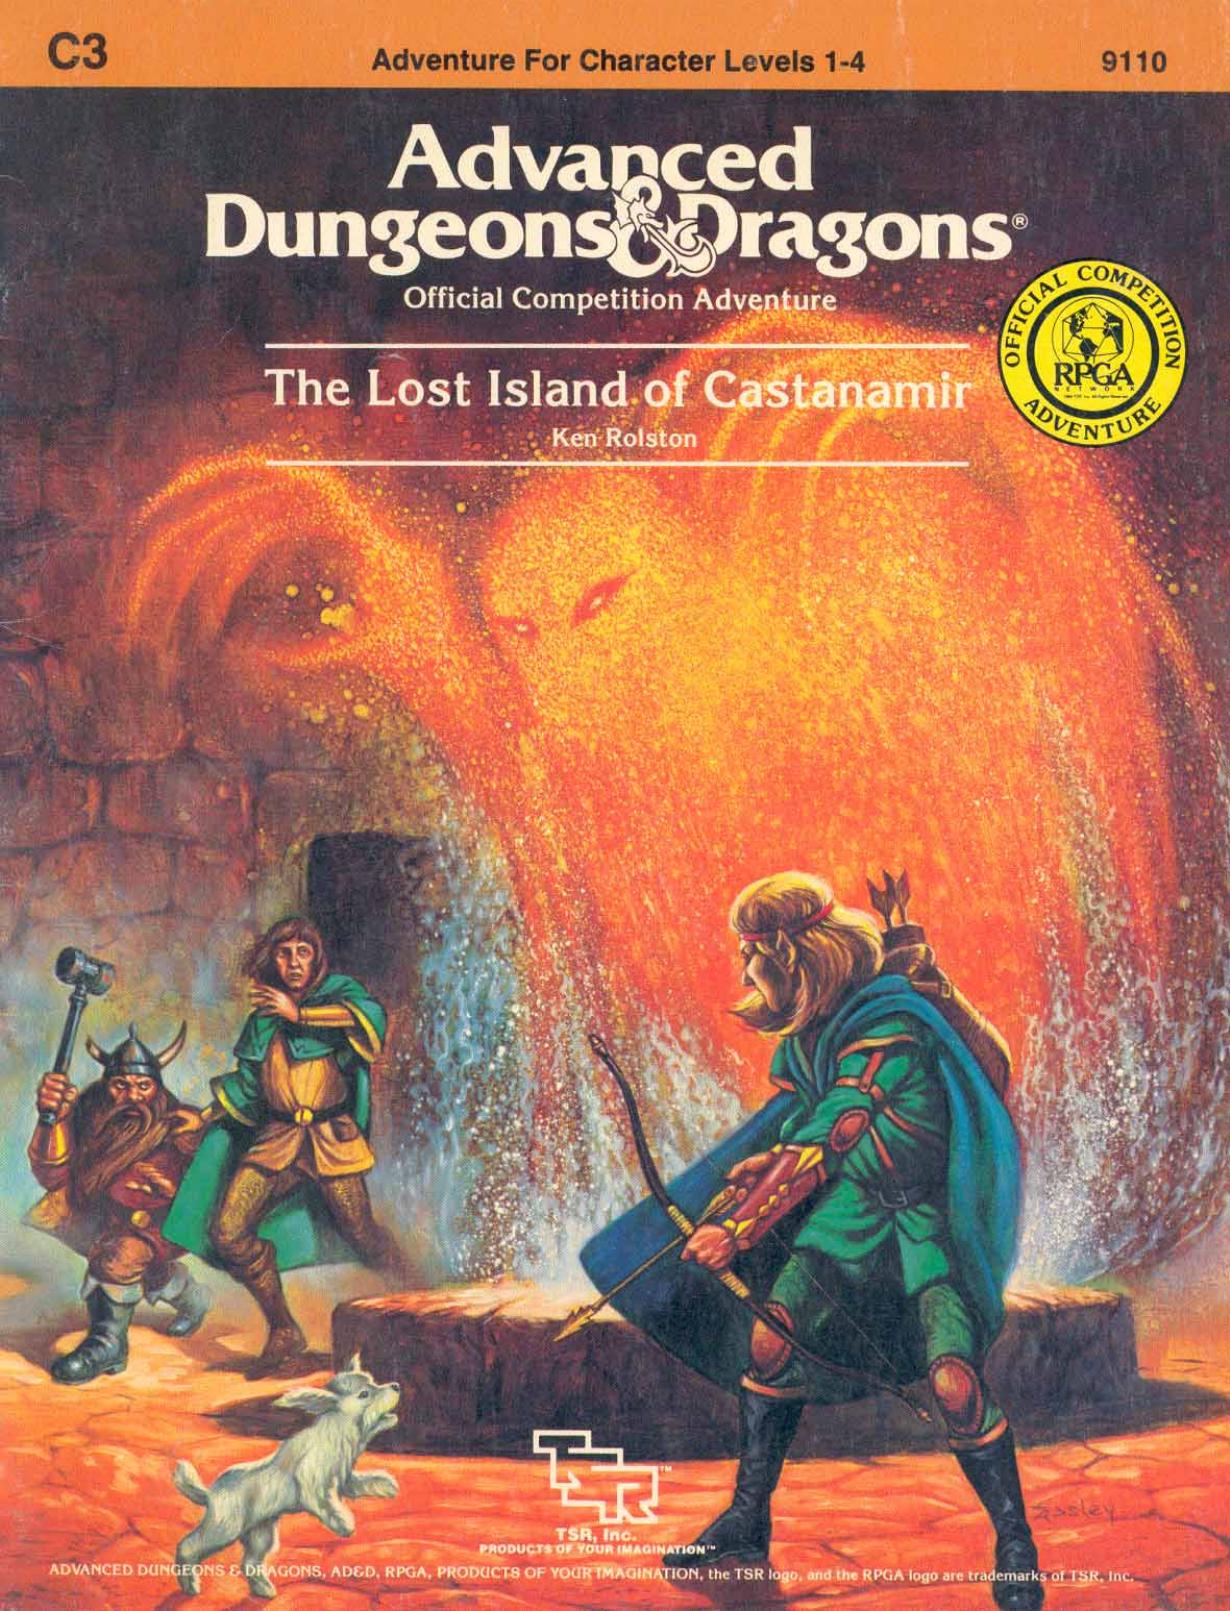 The Lost Island of Castanamir